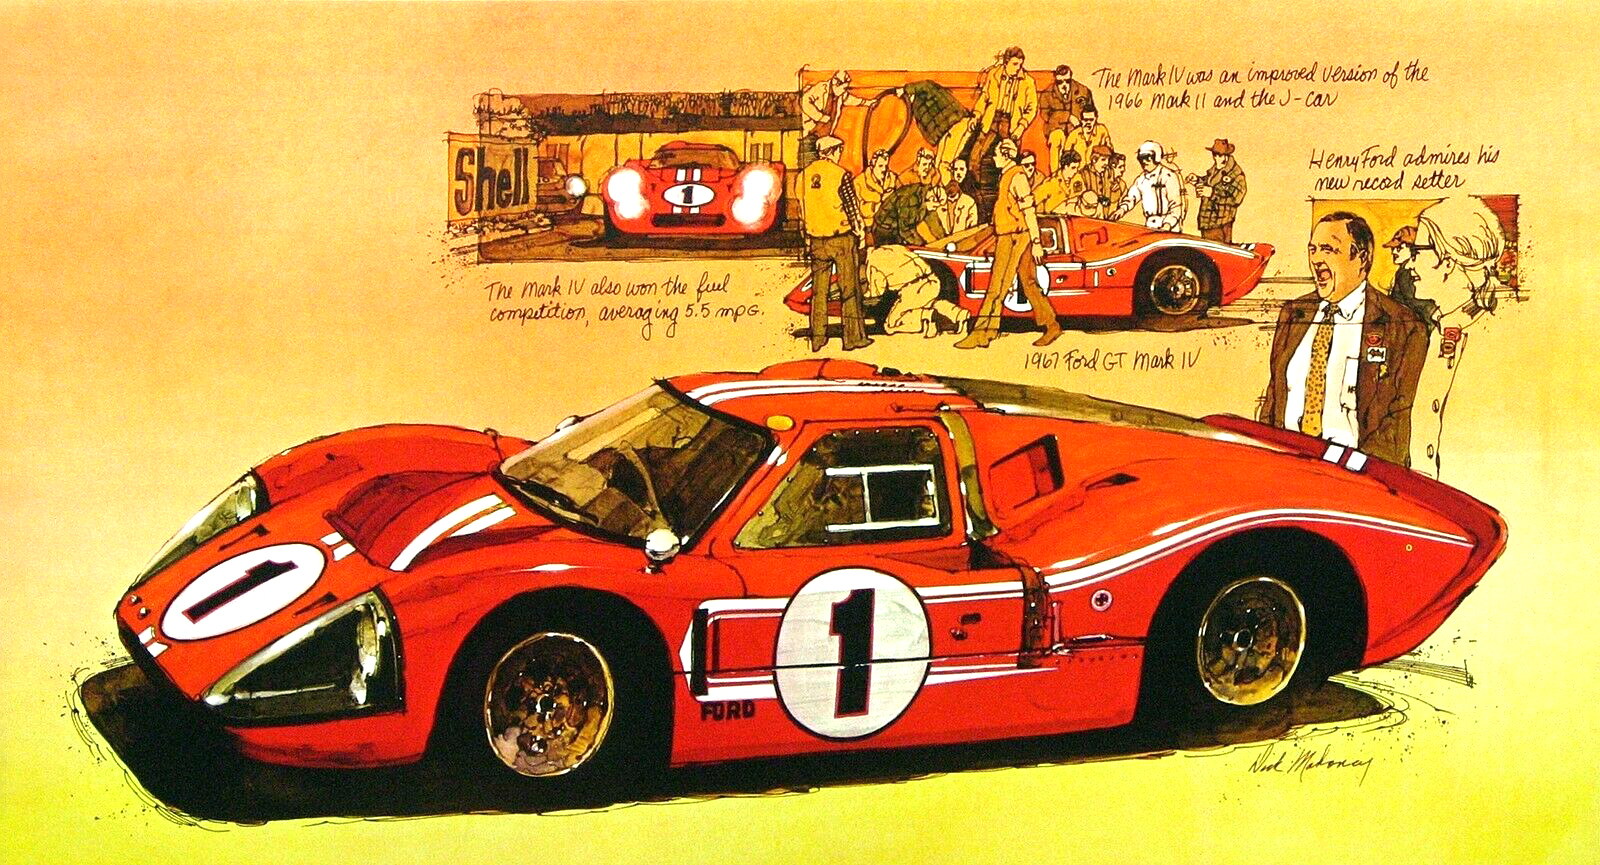 1967 Ford GT Mark IV: Illustrated by Dick Mahoney